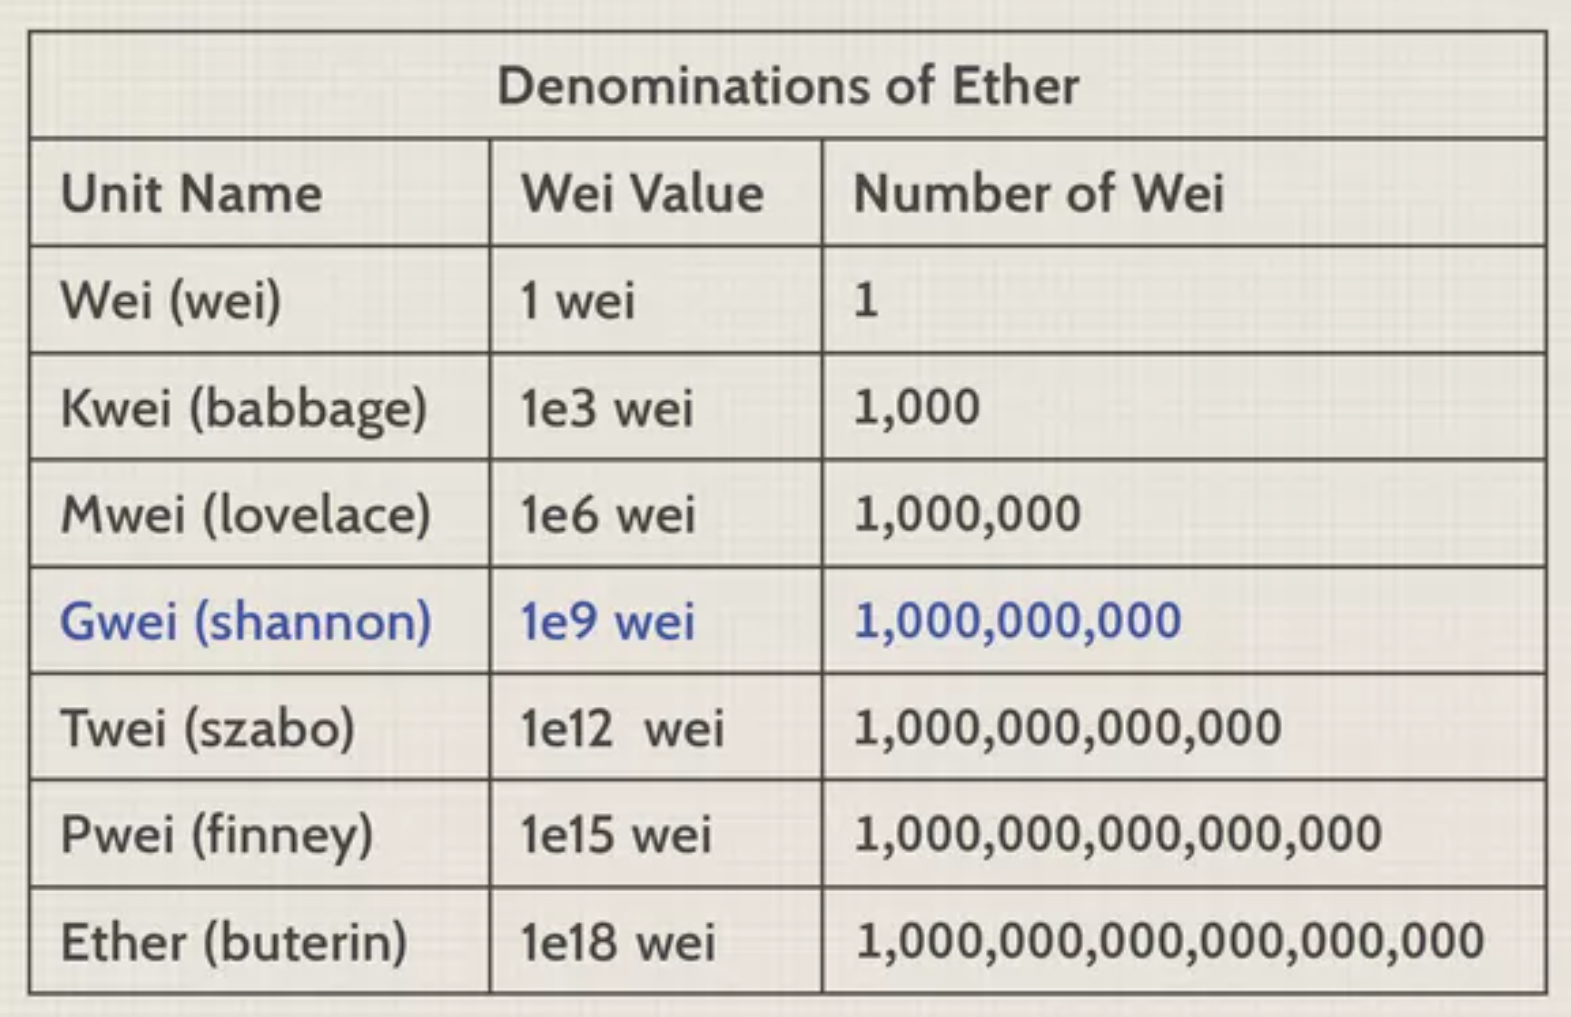 Figure 1: Denominations of Ethers